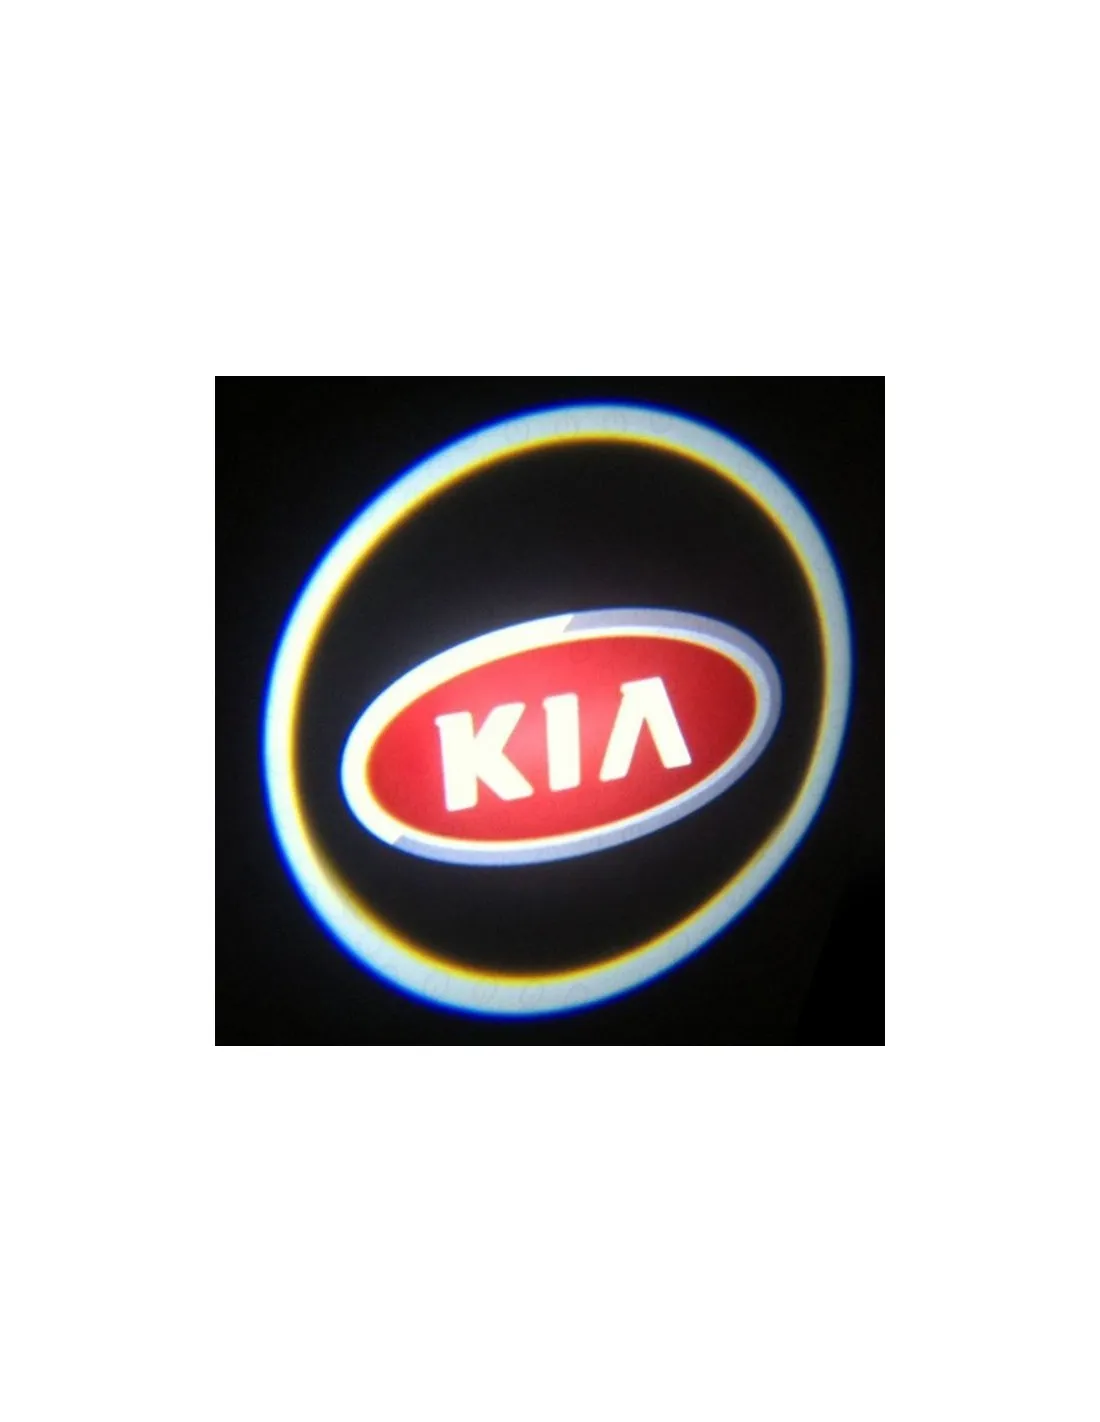 LED Logo Projector for Kia car door with Battery no holes no connections  Plug & Play